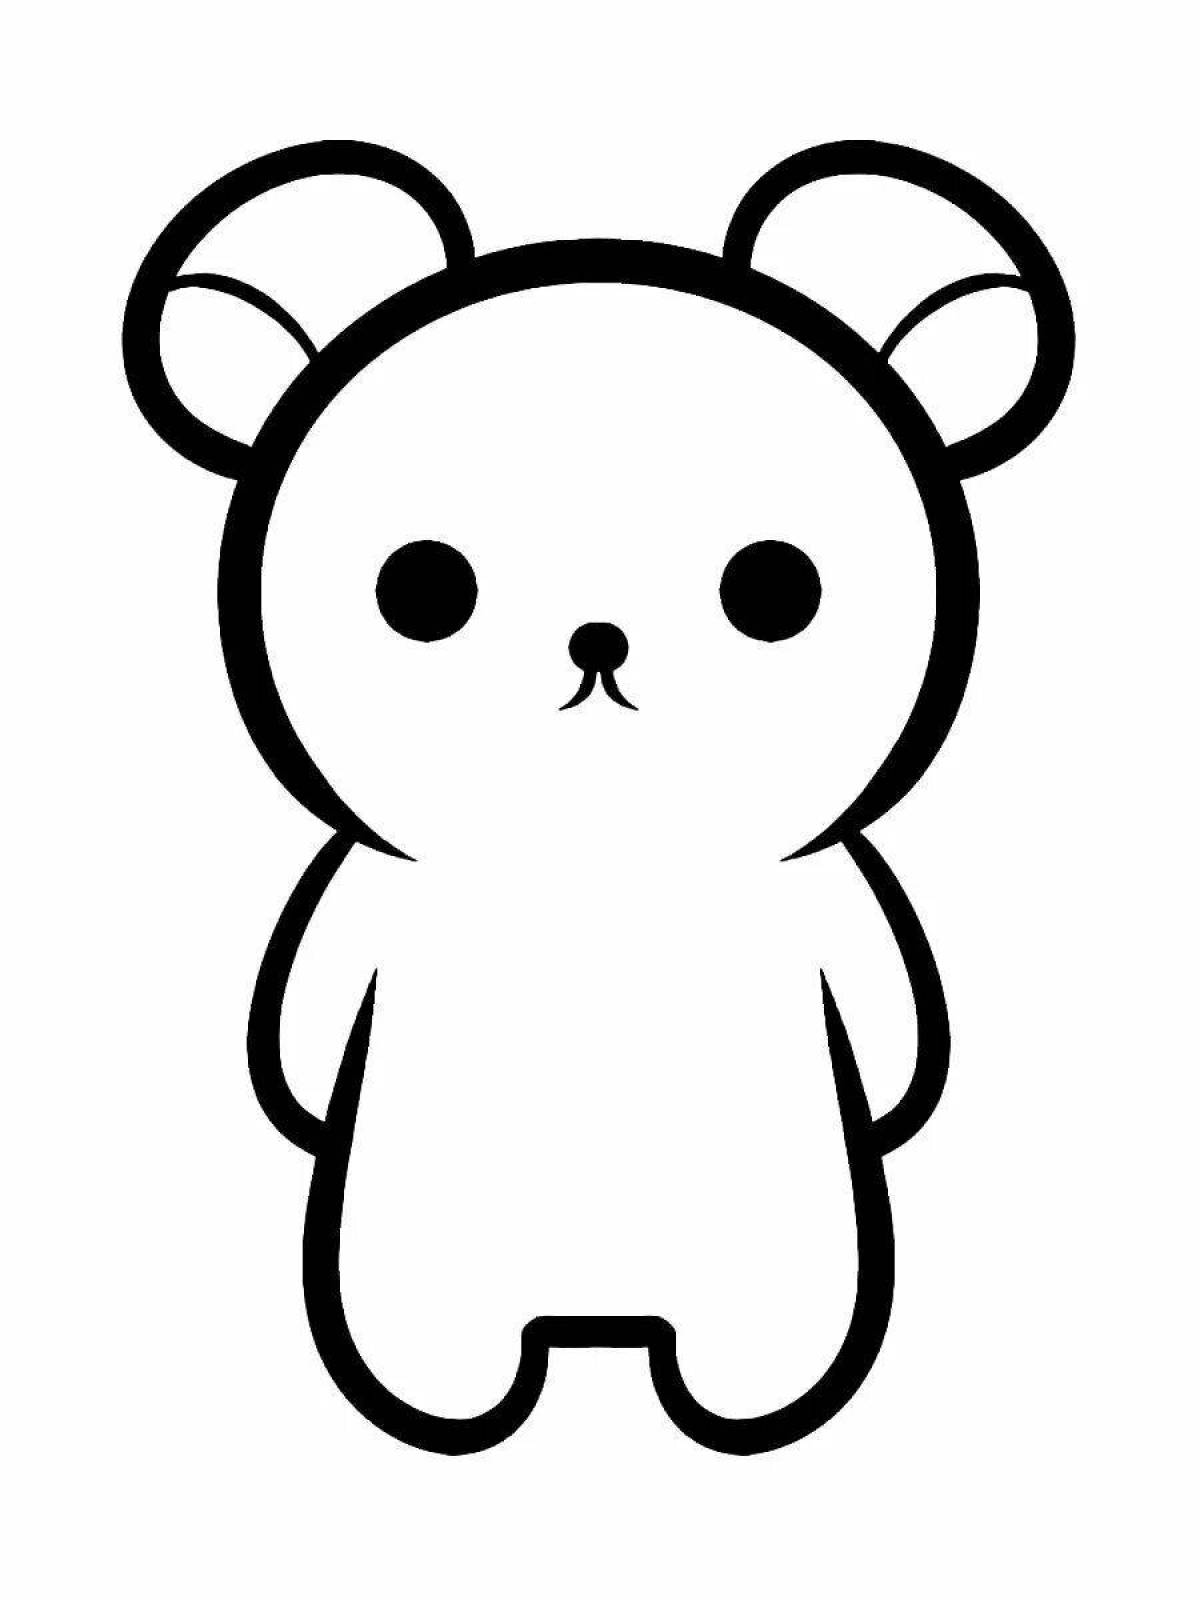 Coloring page adorable cute teddy bear